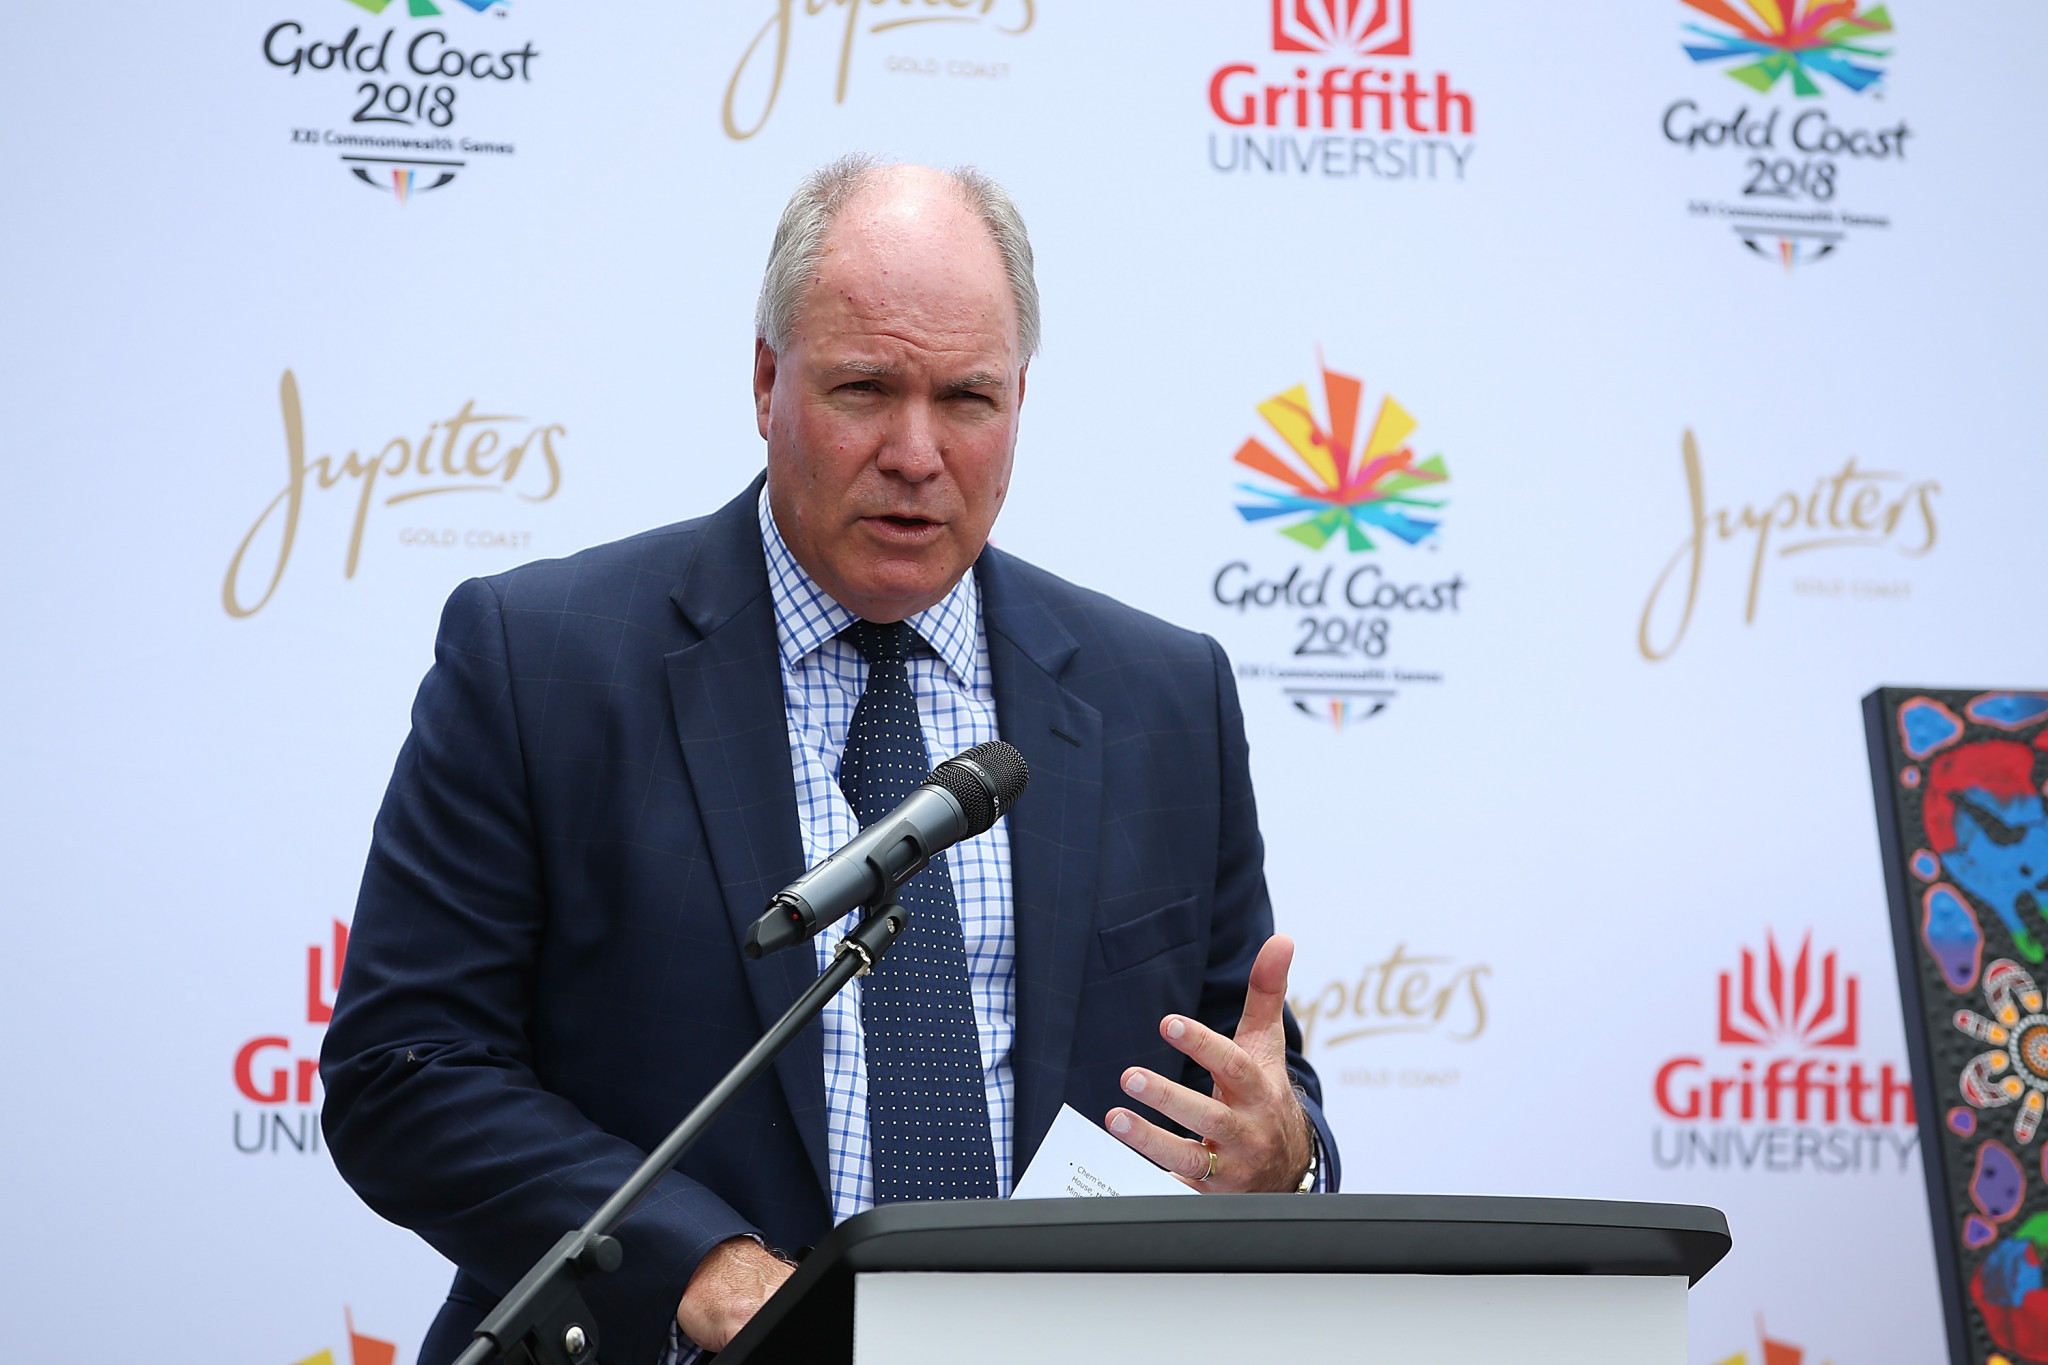 Gold Coast 2018 chief executive Mark Peters claims the rules about broadcast video and audio content are consistent with previous Commonwealth Games ©Getty Images